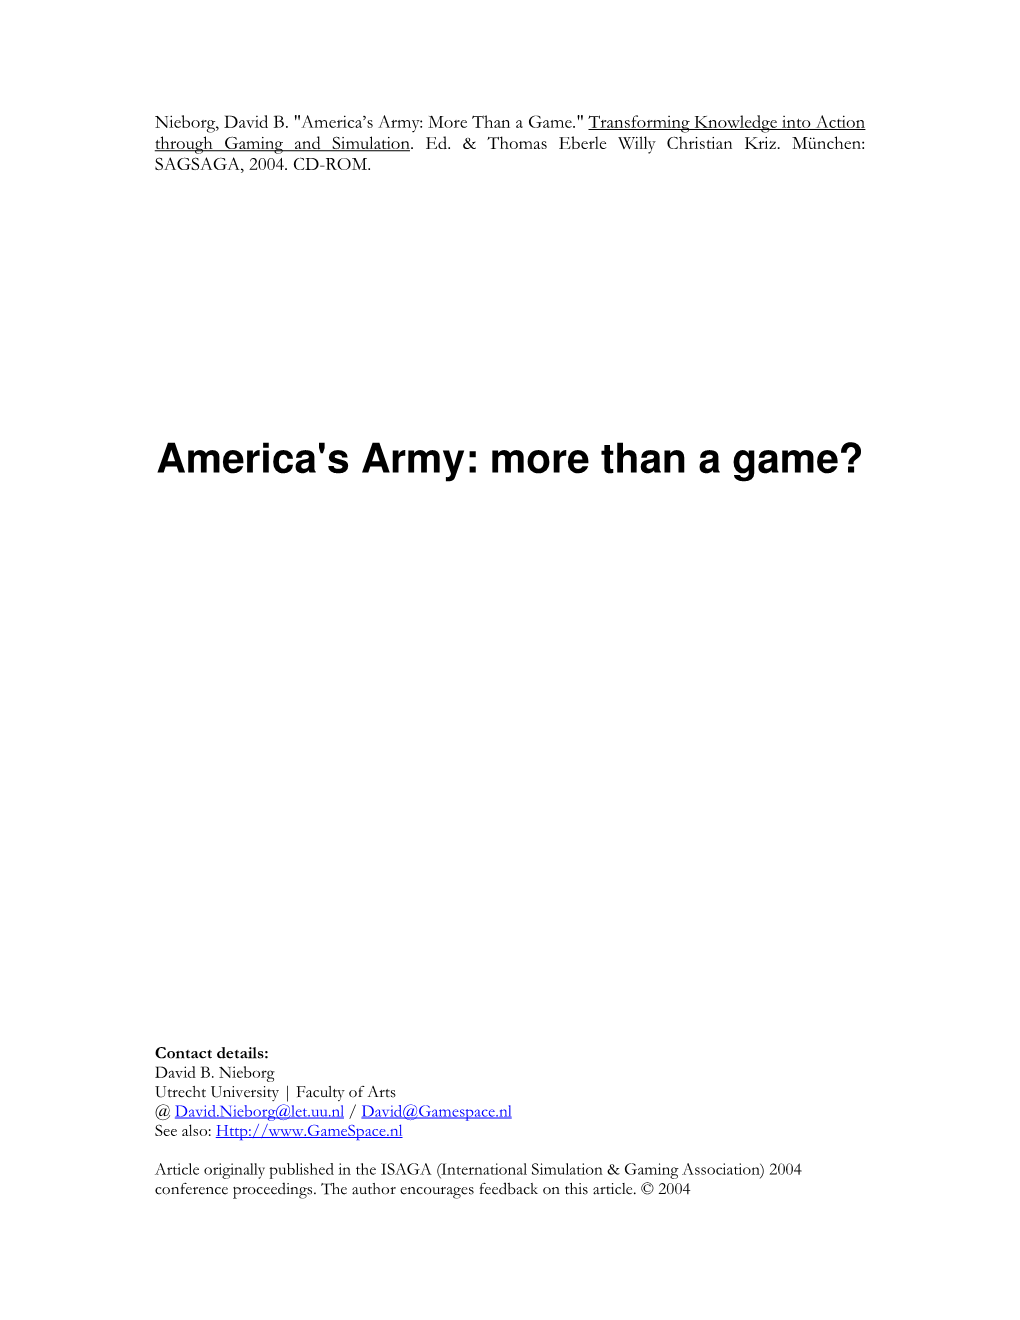 America's Army: More Than a Game?